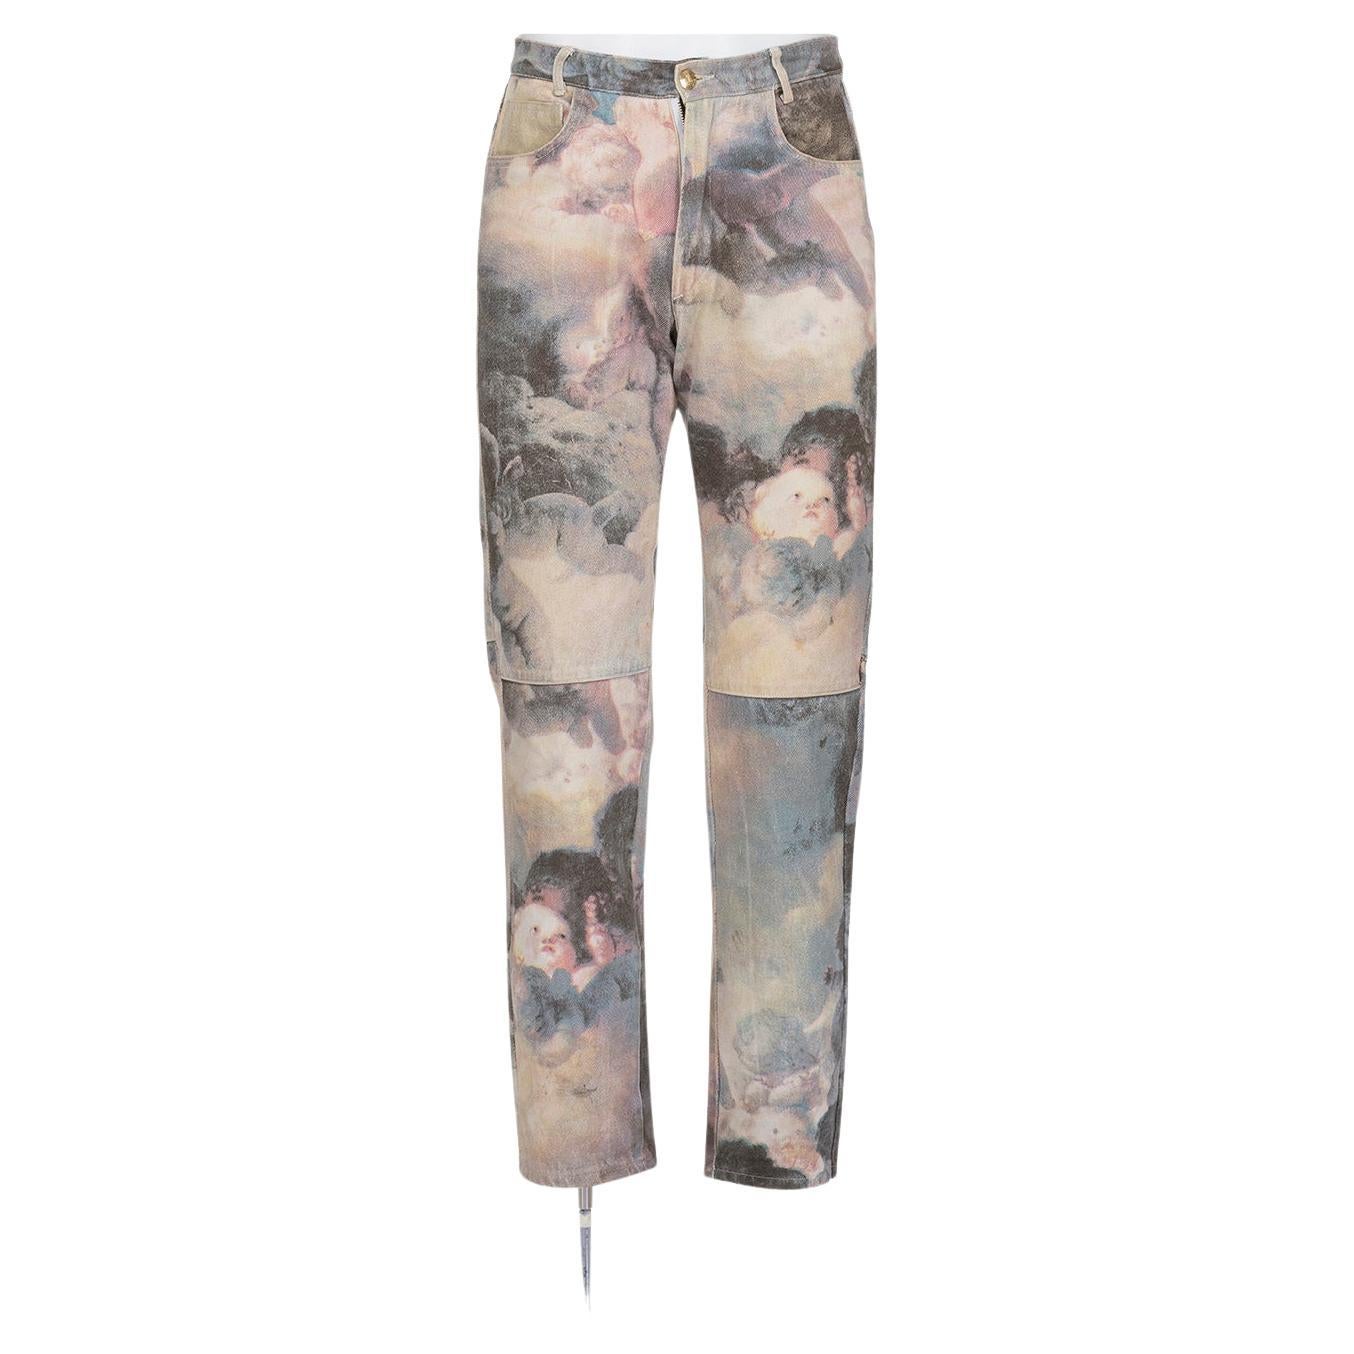 VIVIENNE WESTWOOD FW 91 Iconic and Rare "The Swarm Of Cupids" Printed Jeans For Sale